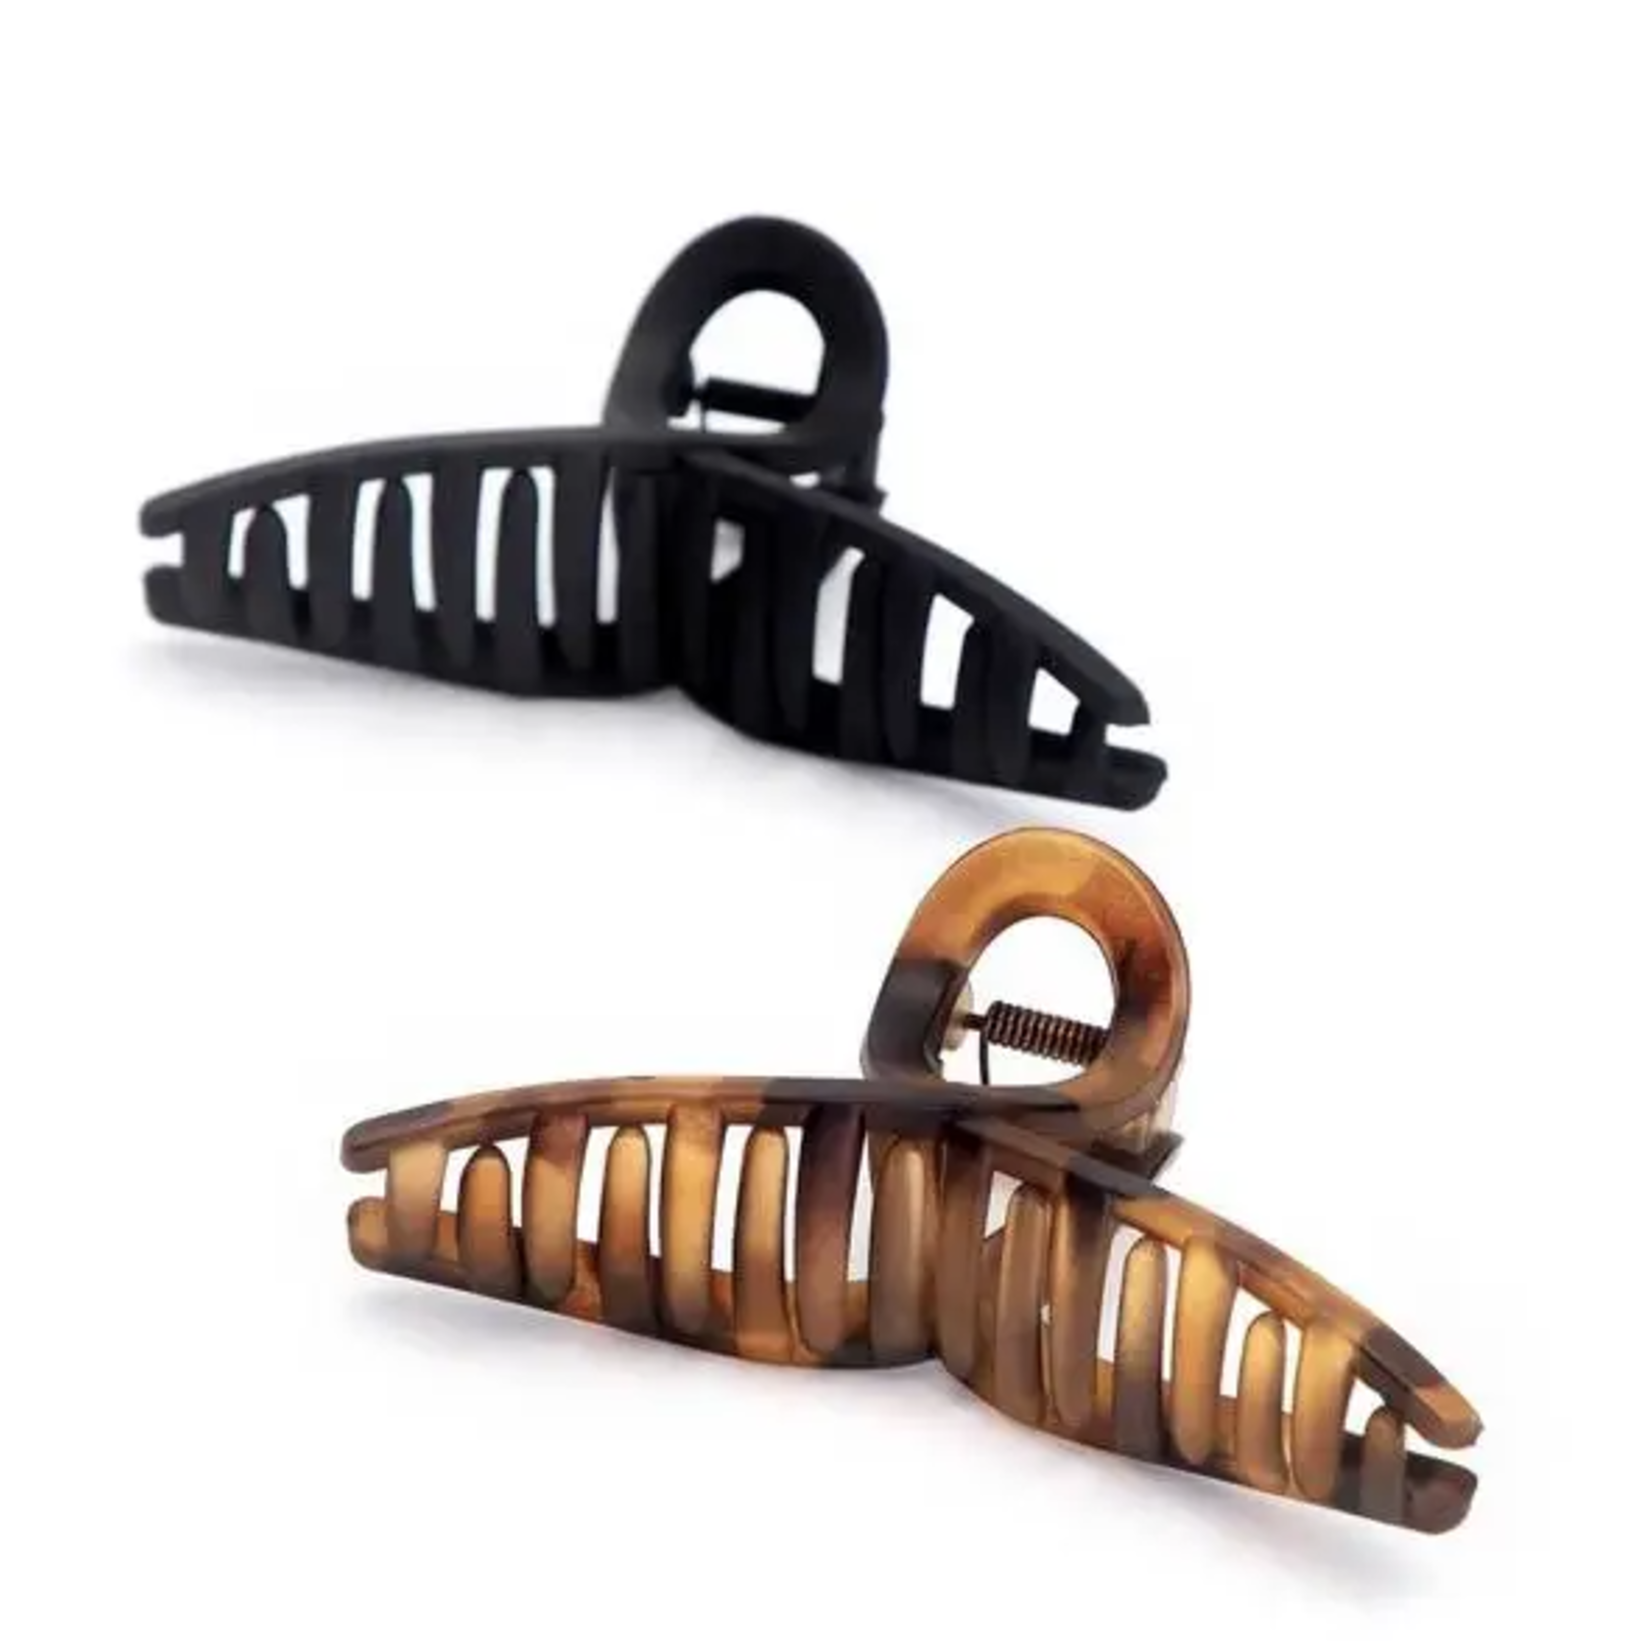 Large Loop Claw Clip 2pc Set